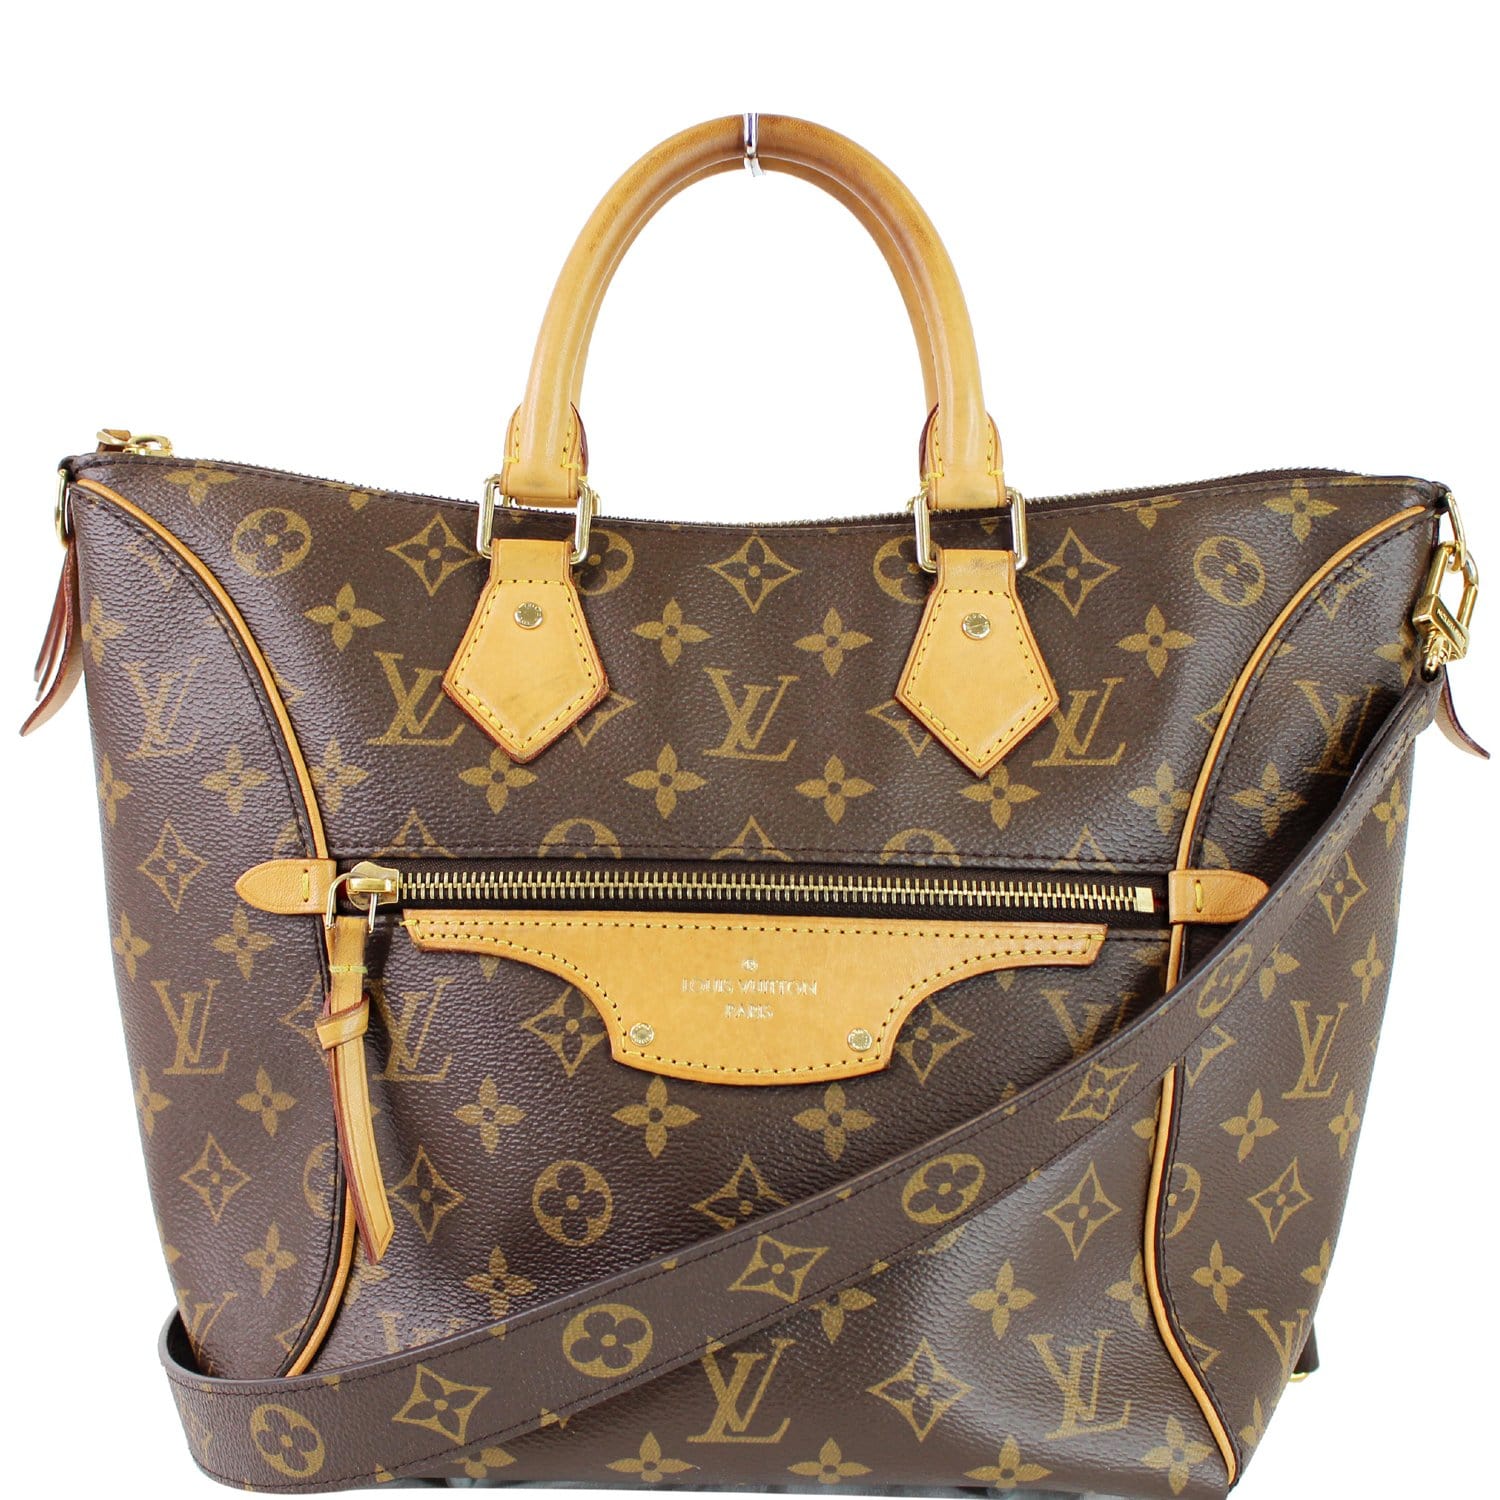 LV Monogram Tournelle Bag Available Now! Retail Price: $2090 Loop